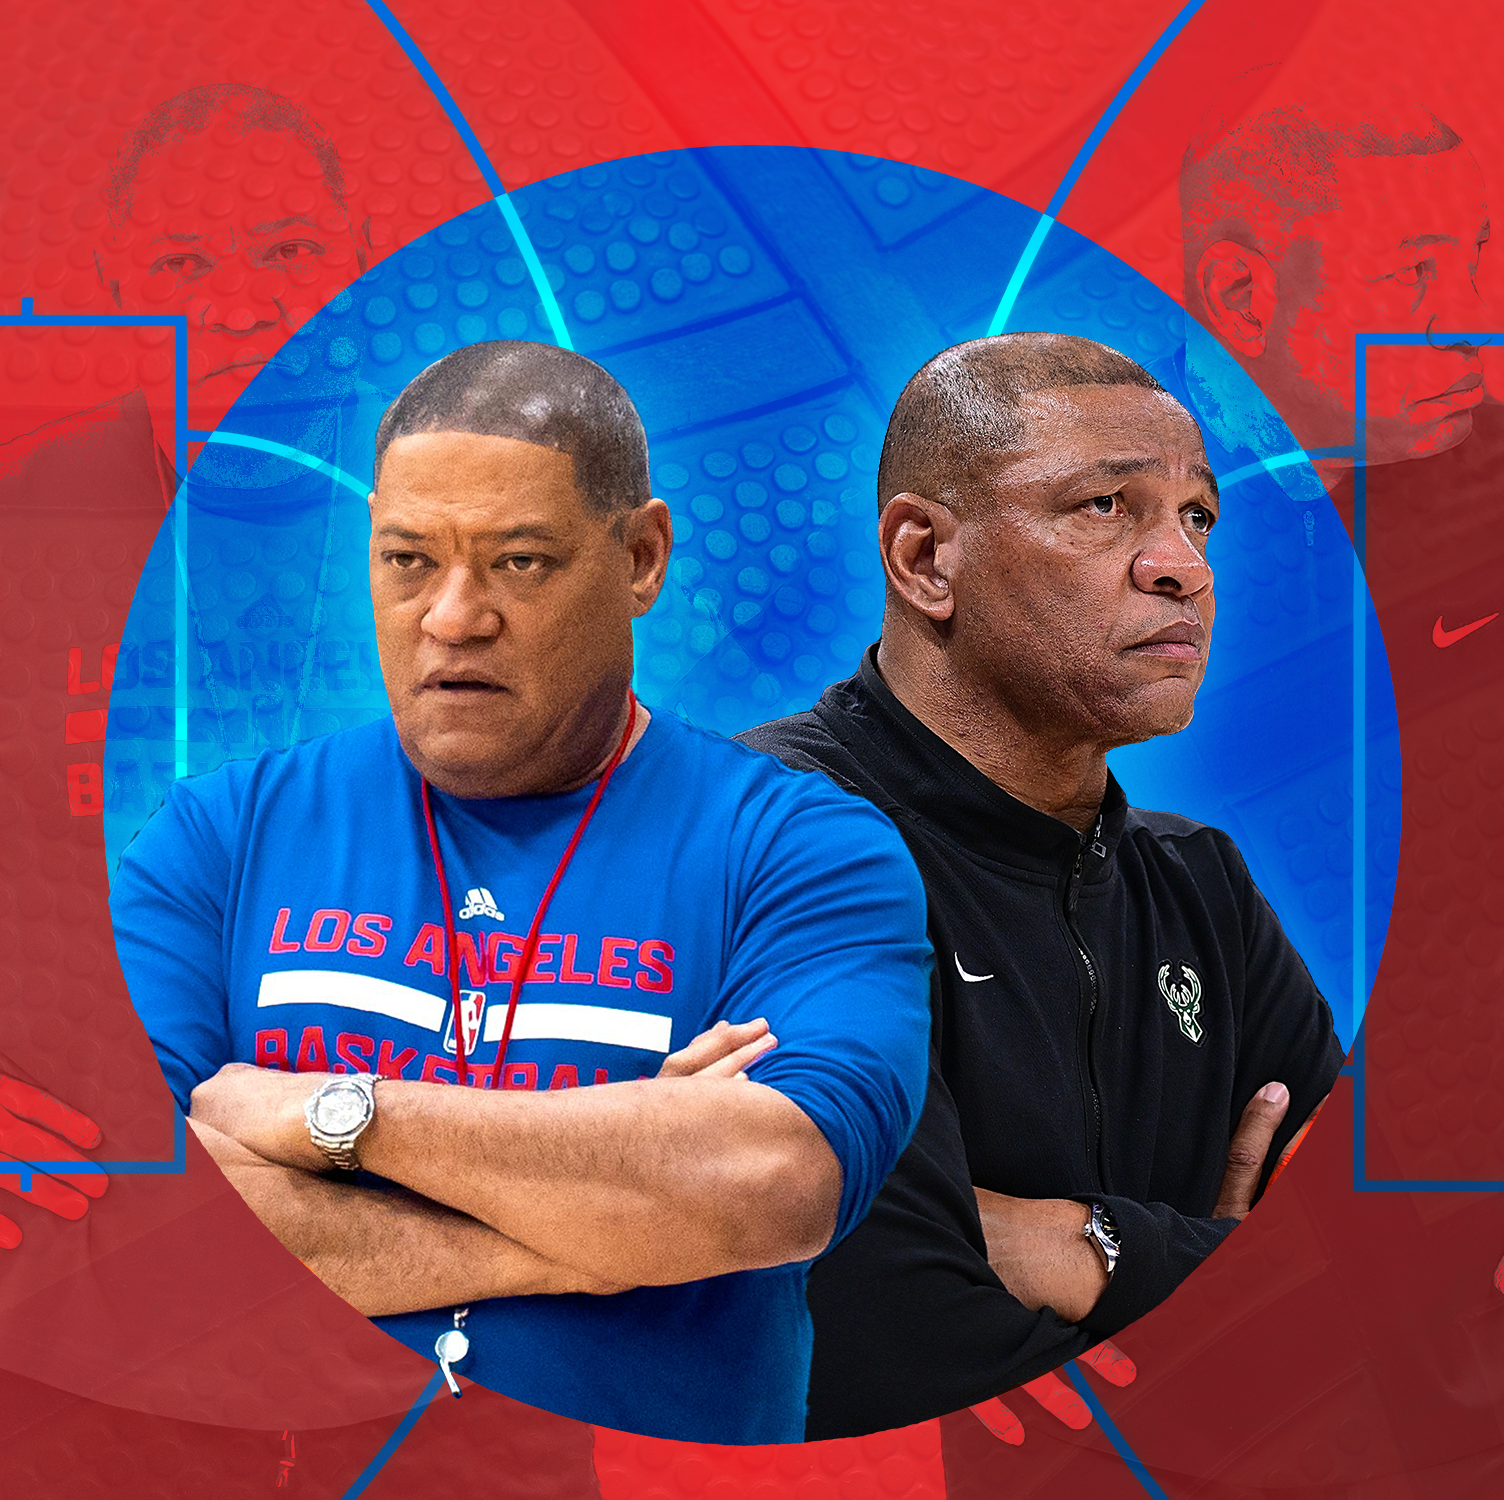 Laurence Fishburne’s Key to Playing Doc Rivers? Having No Idea Who He Was.